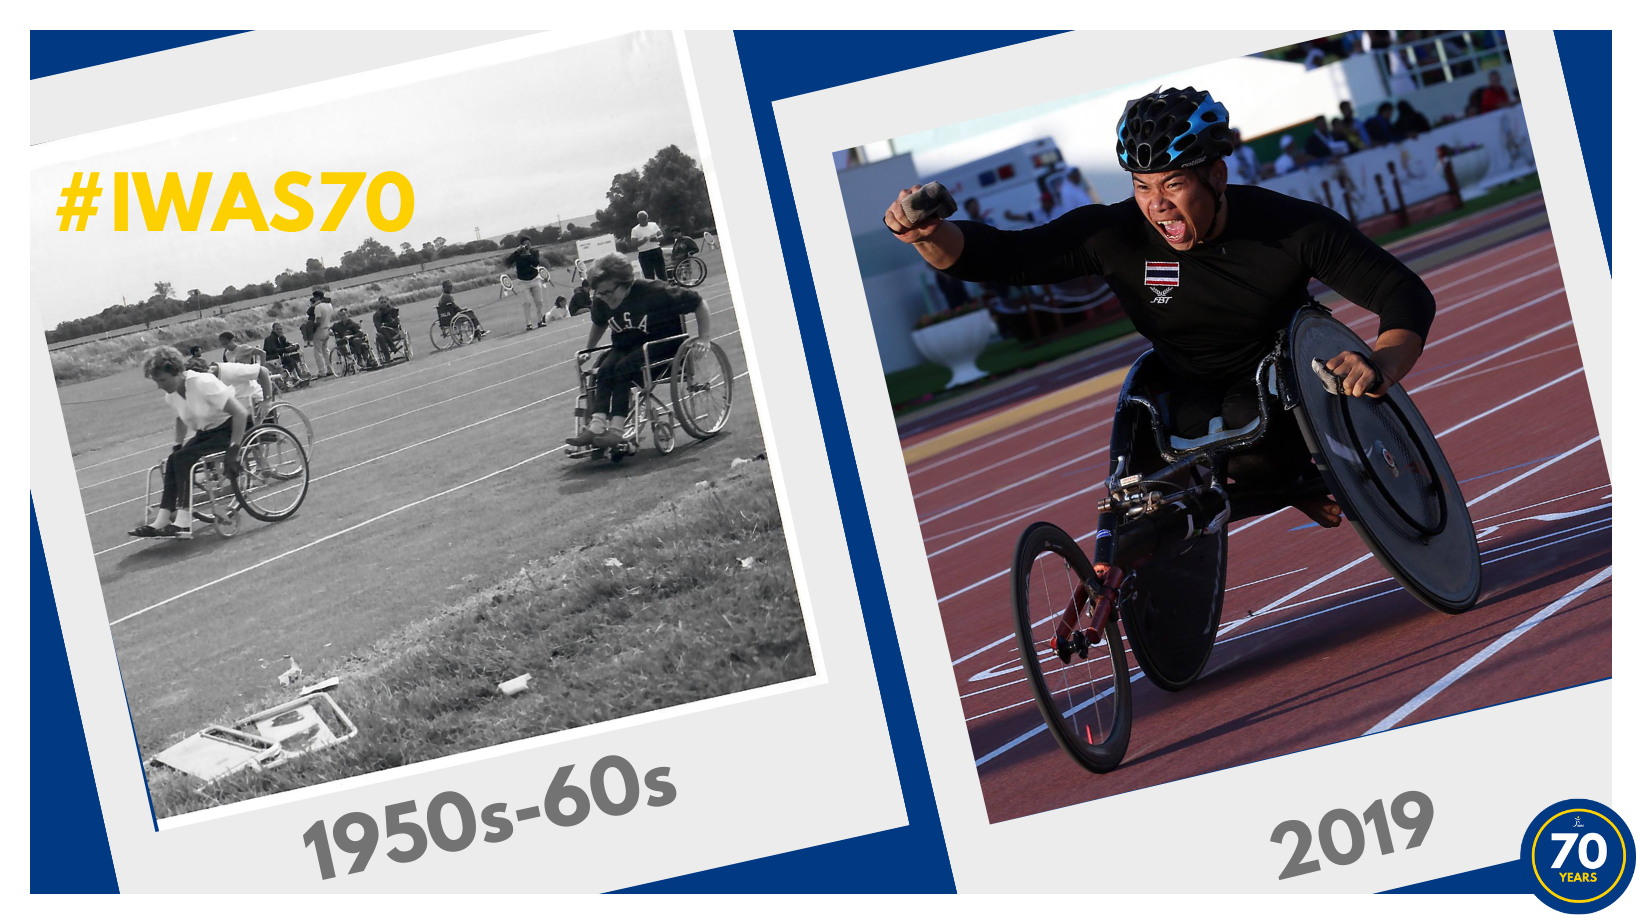 International Wheelchair and Amputee Sports Federation celebrates 70th anniversary